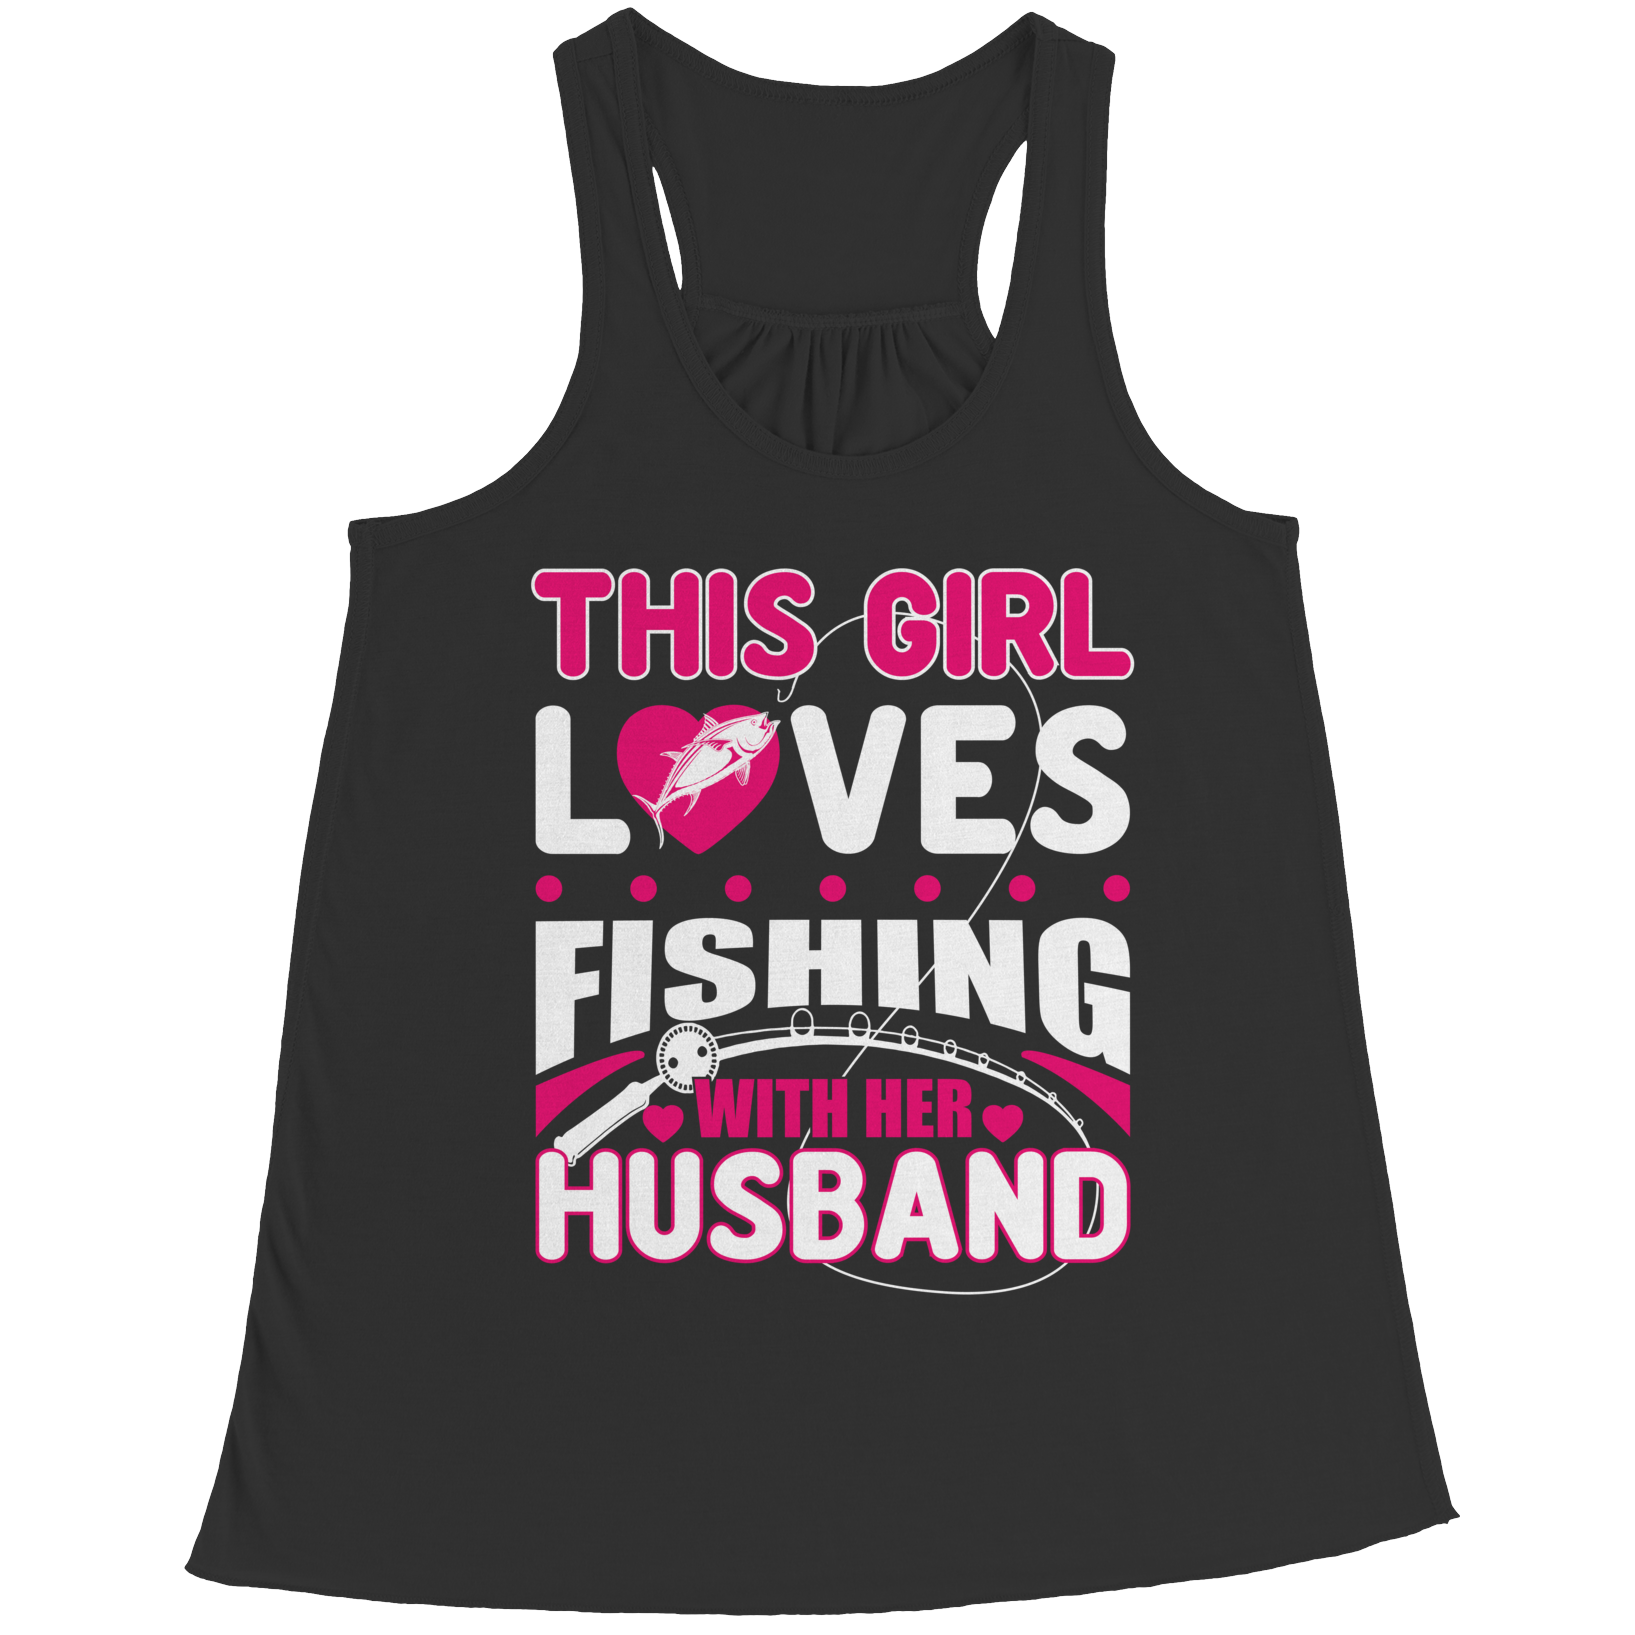 Limited Edition! Do you love fishing with your Husband